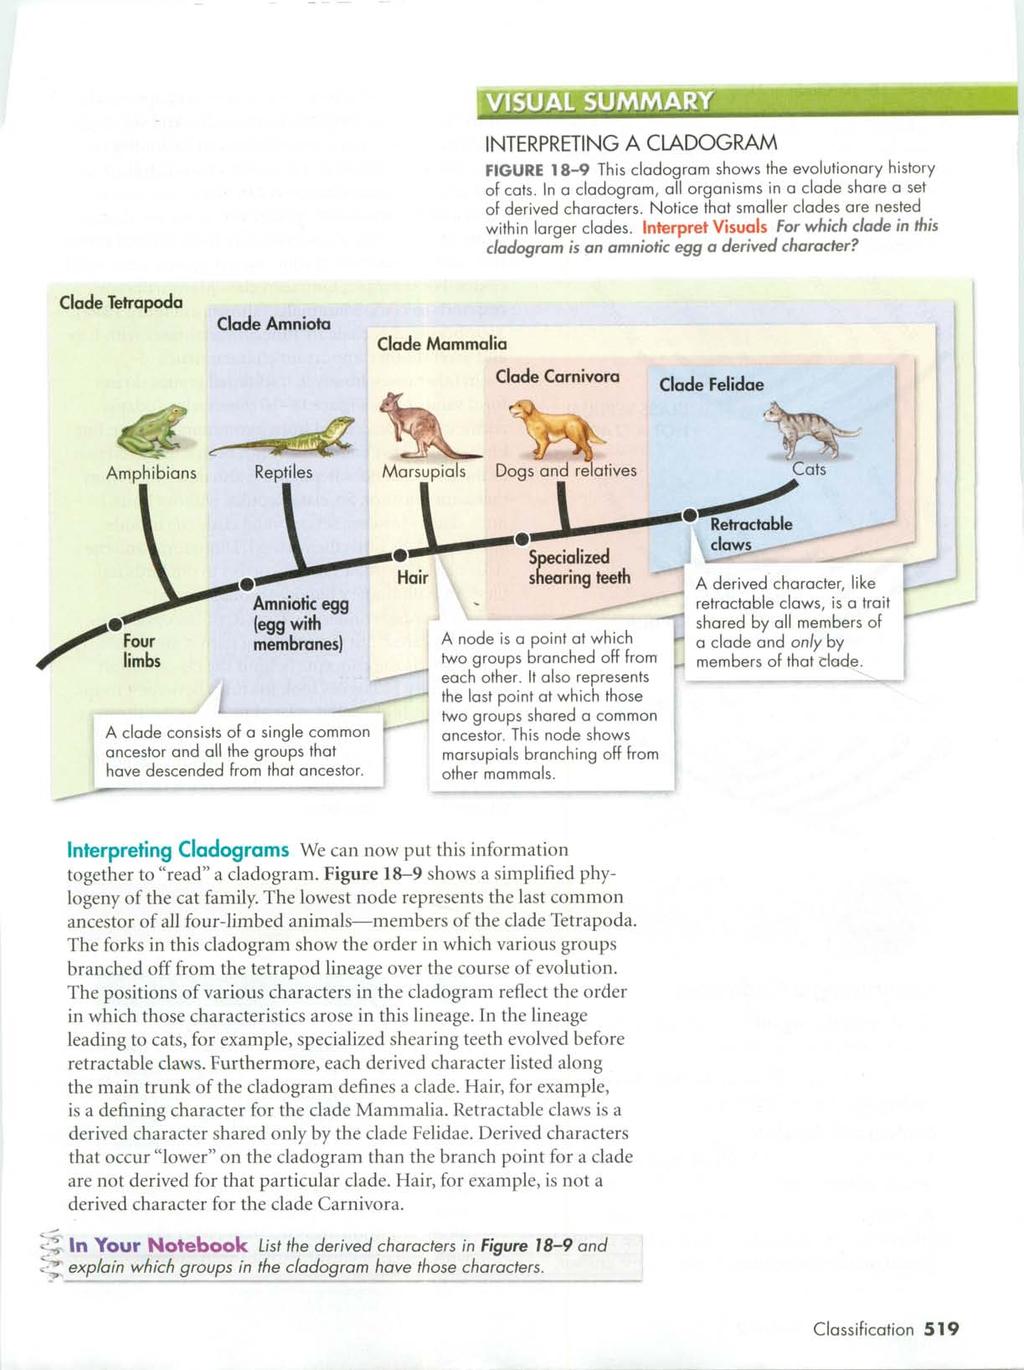 VISUAL SUMMARY INTERPRETING A CLADOGRAM FIGURE 18-9 This cladogram shows the evolutionary history of cats. In a cladogram, all organisms in a clade share a set of derived characters.